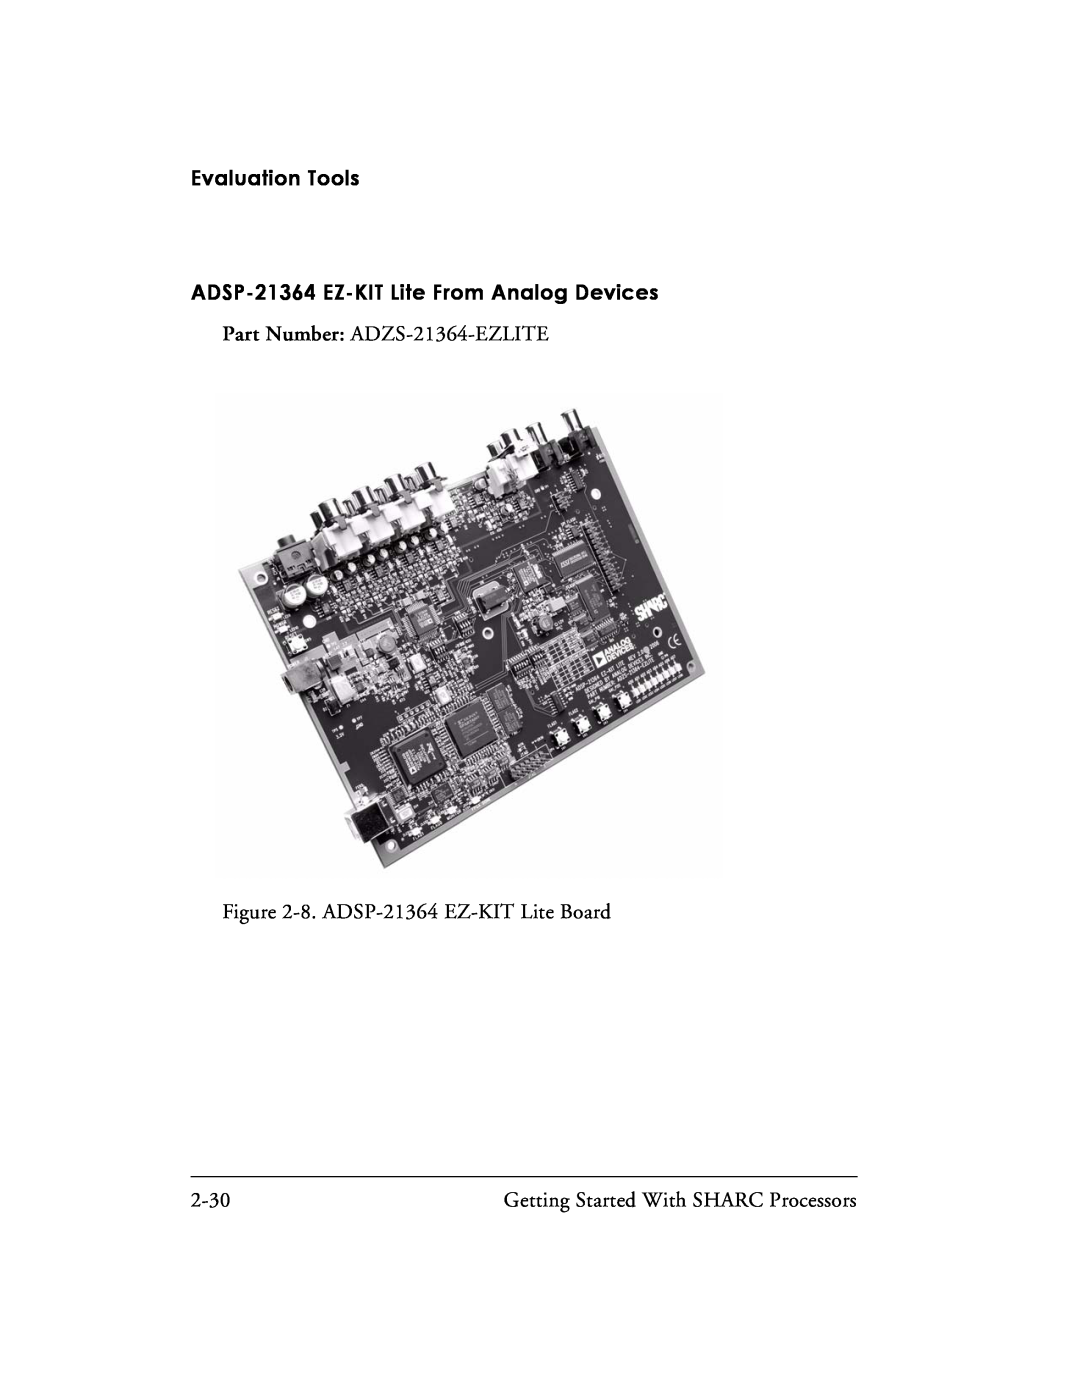 Analog Devices 82-003536-01 ADSP-21364 EZ-KITLite From Analog Devices, Evaluation Tools, Part Number ADZS-21364-EZLITE 